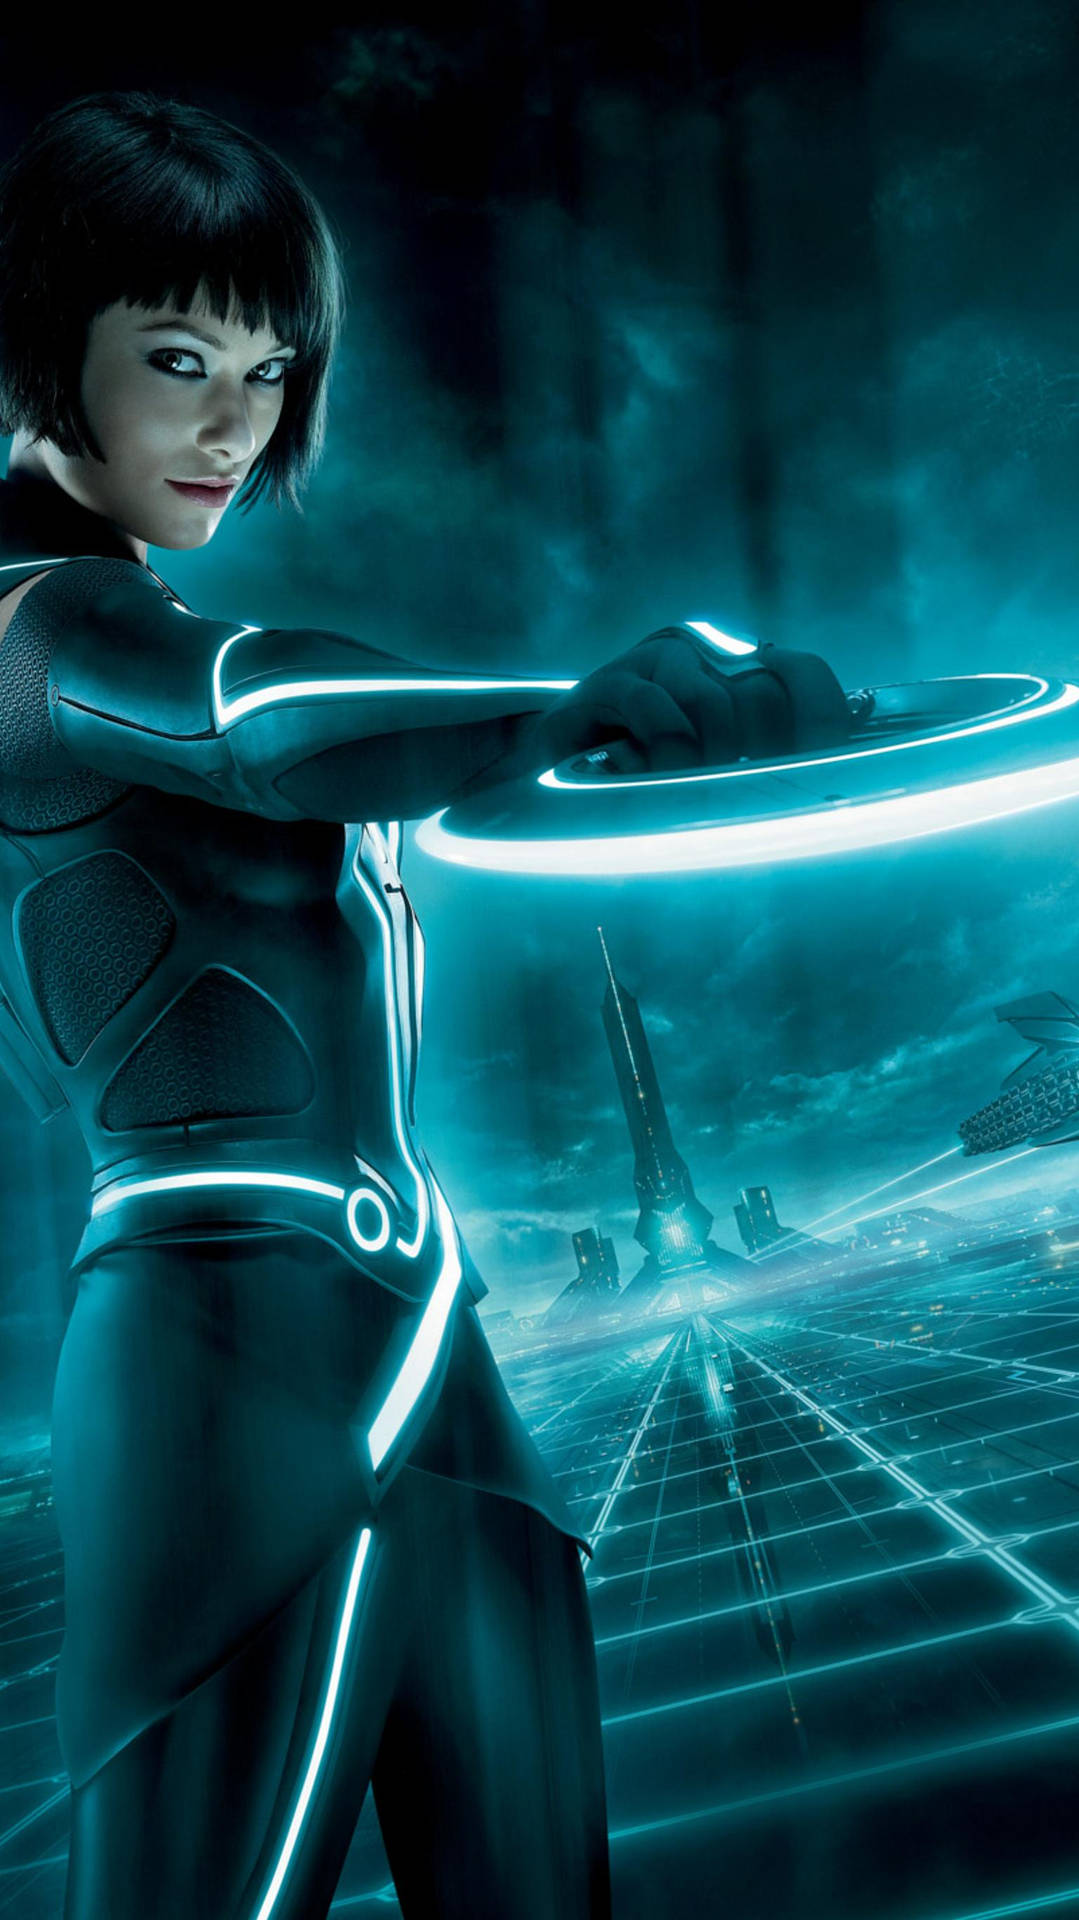 Free Tron Wallpaper Downloads, [100+] Tron Wallpapers for FREE | Wallpapers .com